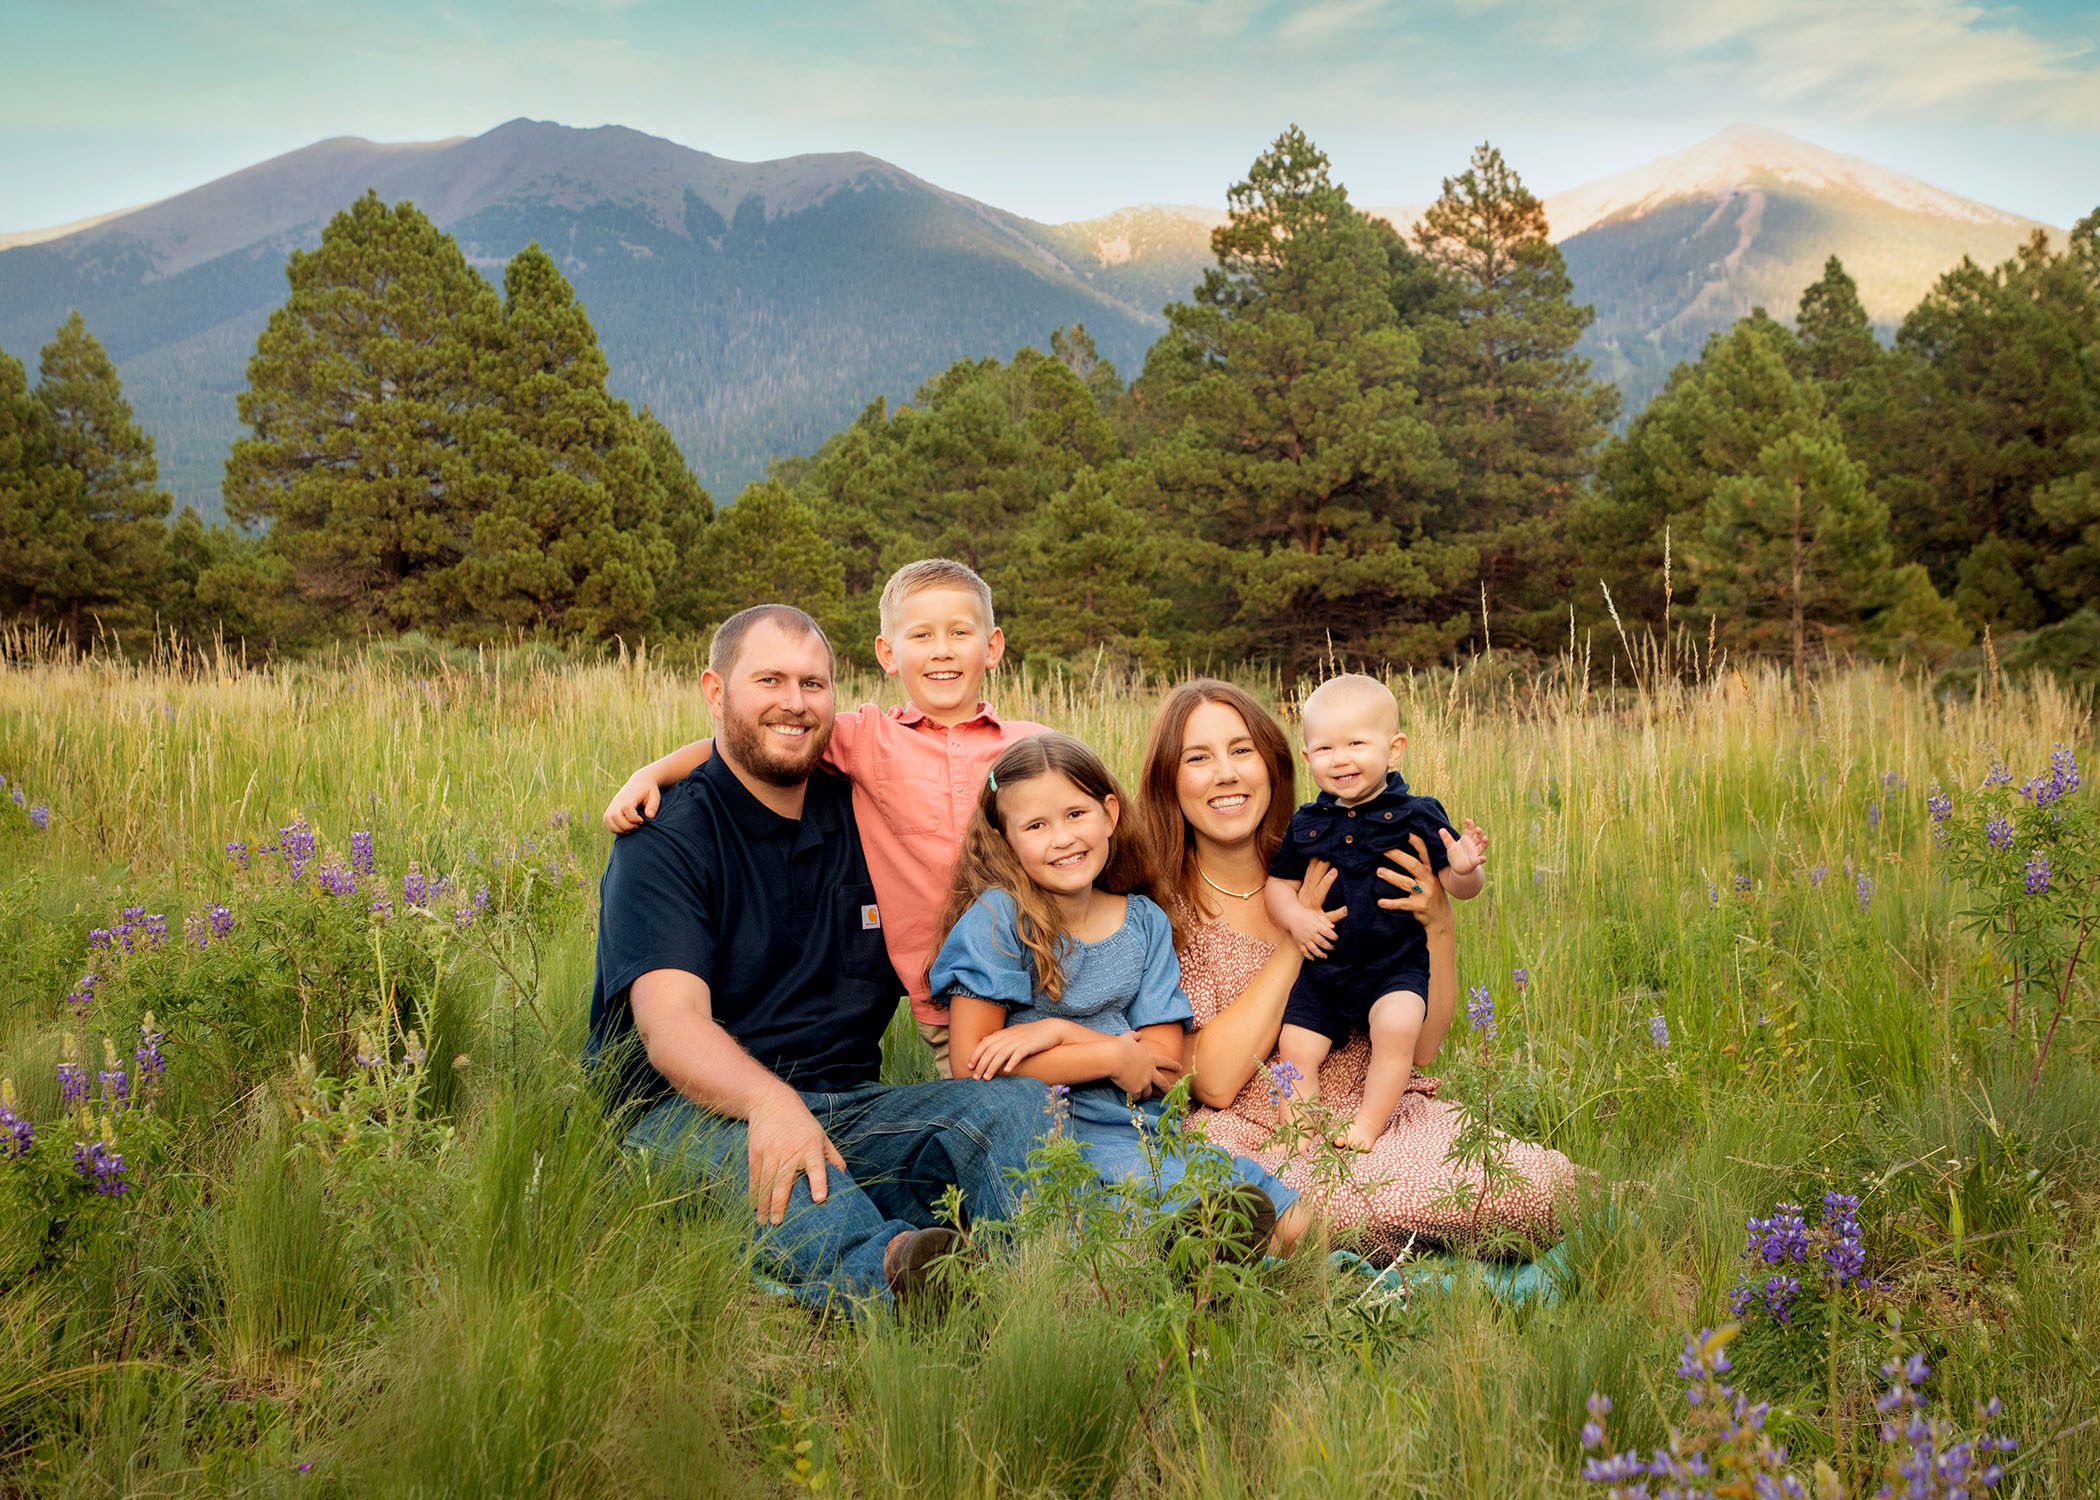 Family of Fiver, Smiling, Sitting in the Grass and Summer Flowers, with the San Francisco Peaks Behind them in Beautiful Flagstaff, AZ, by KDI Photography